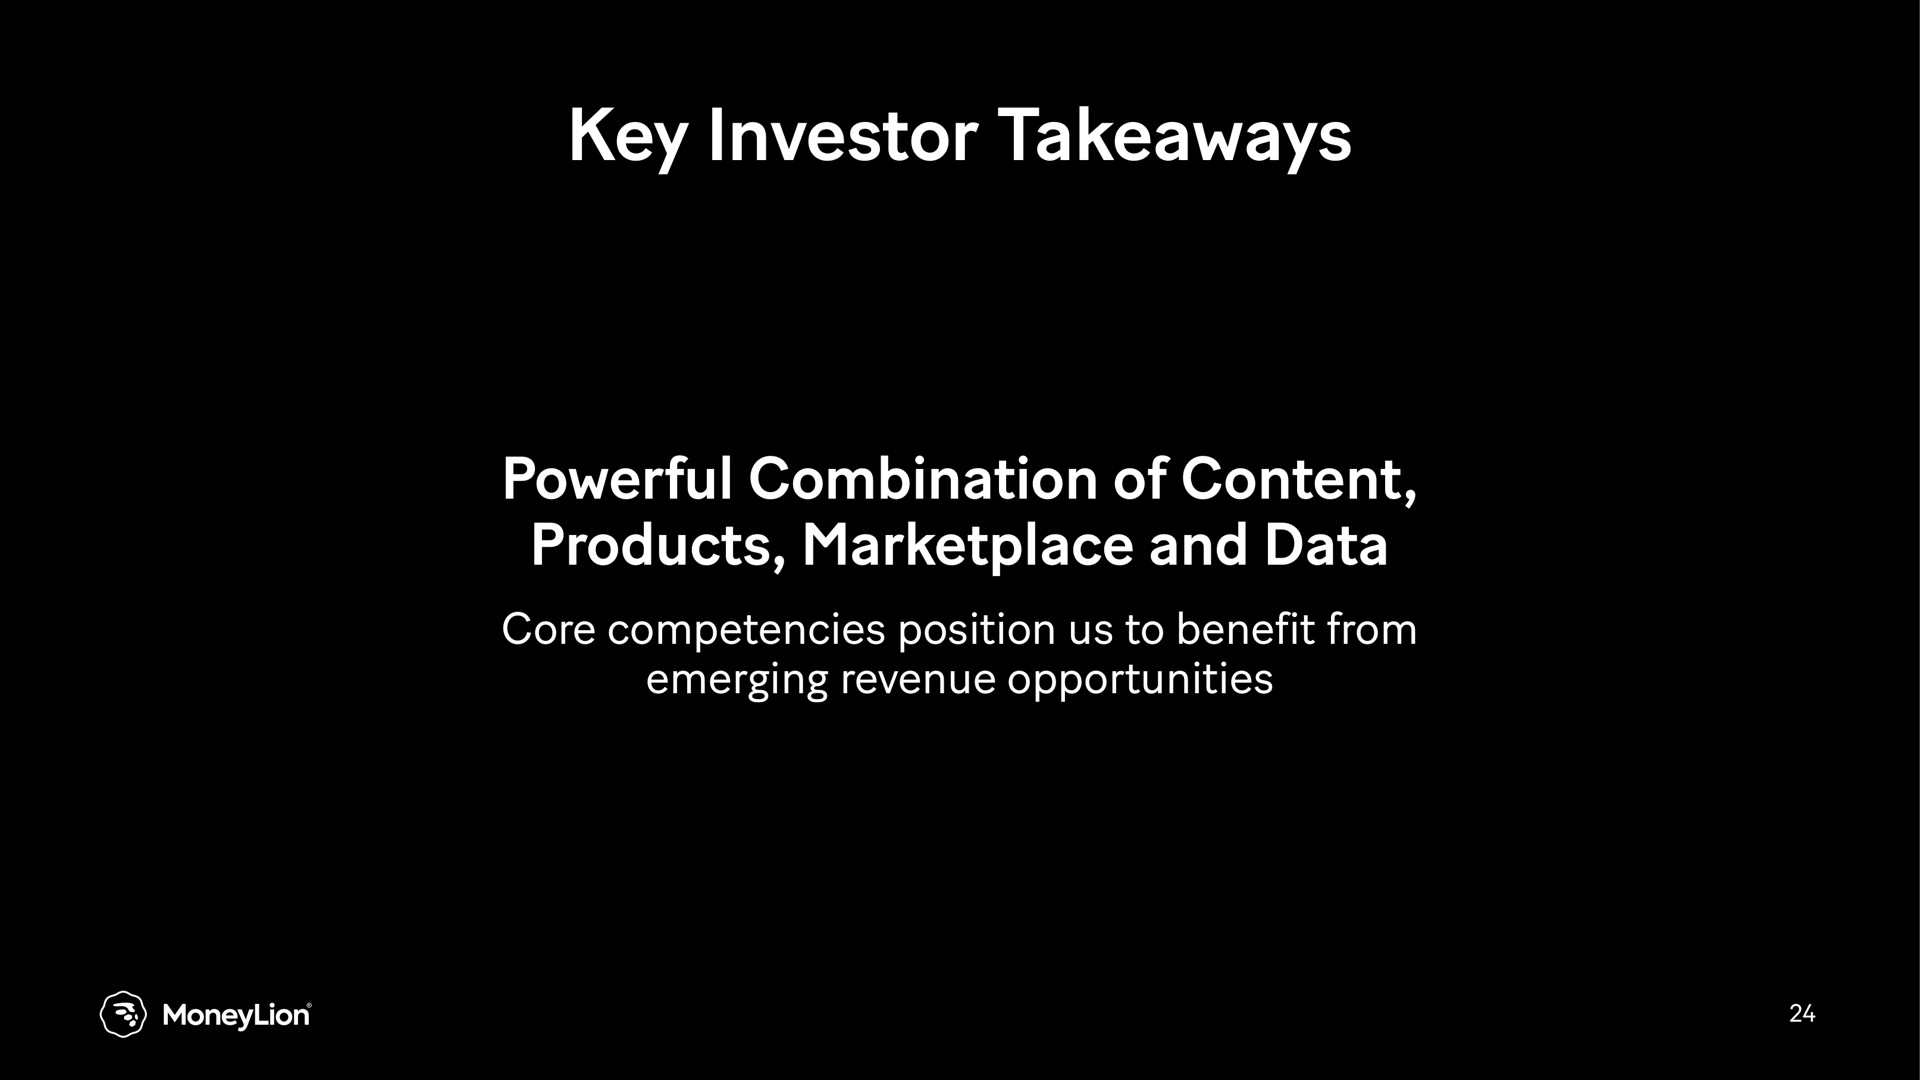 key investor powerful combination of content products and data | MoneyLion